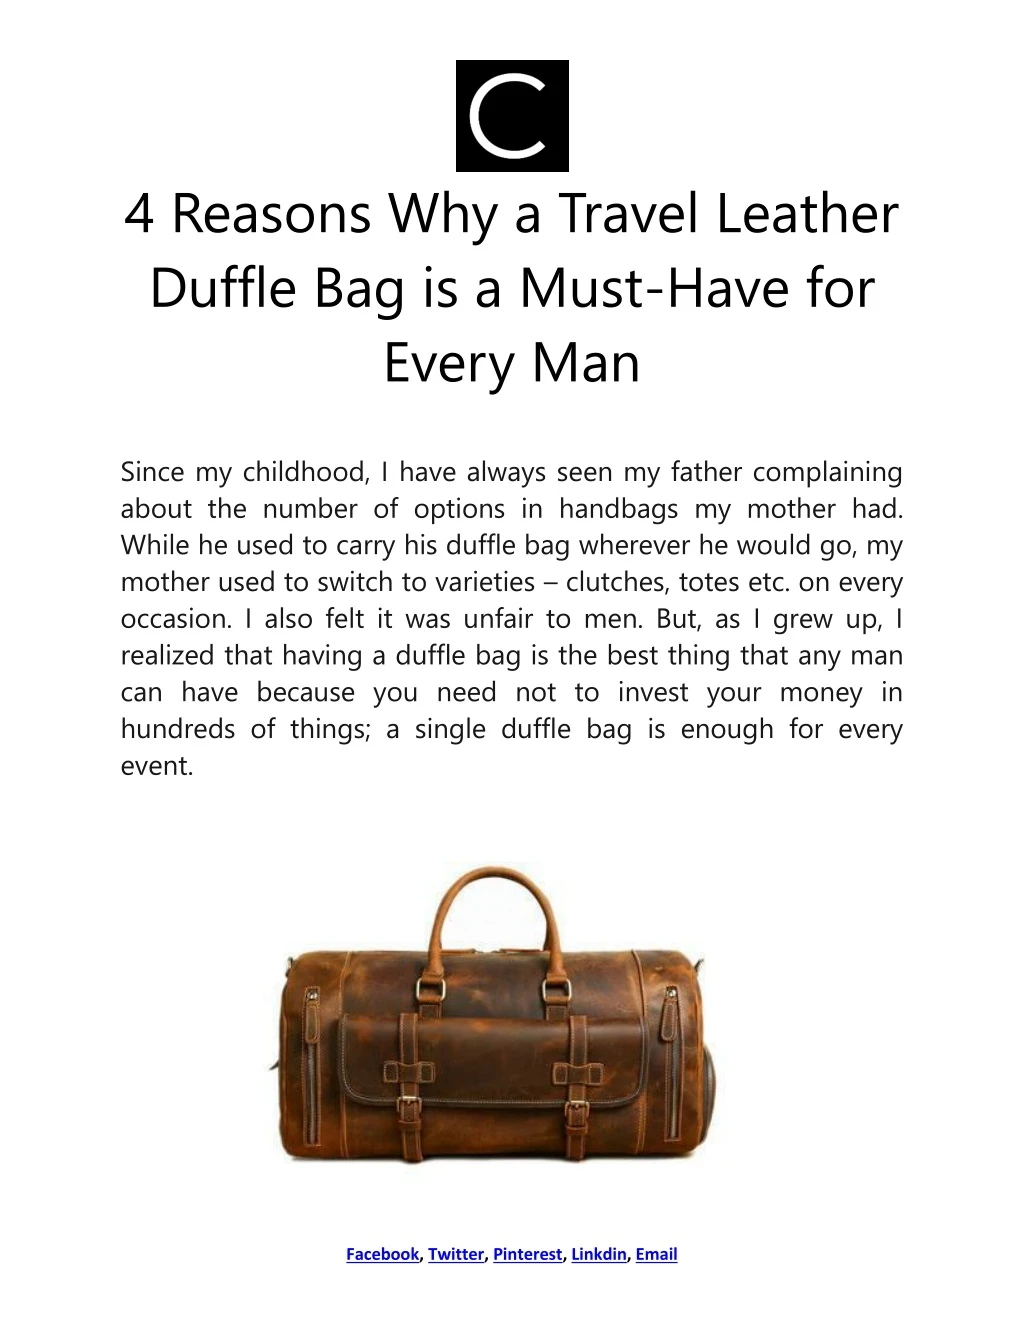 4 reasons why a travel leather duffle